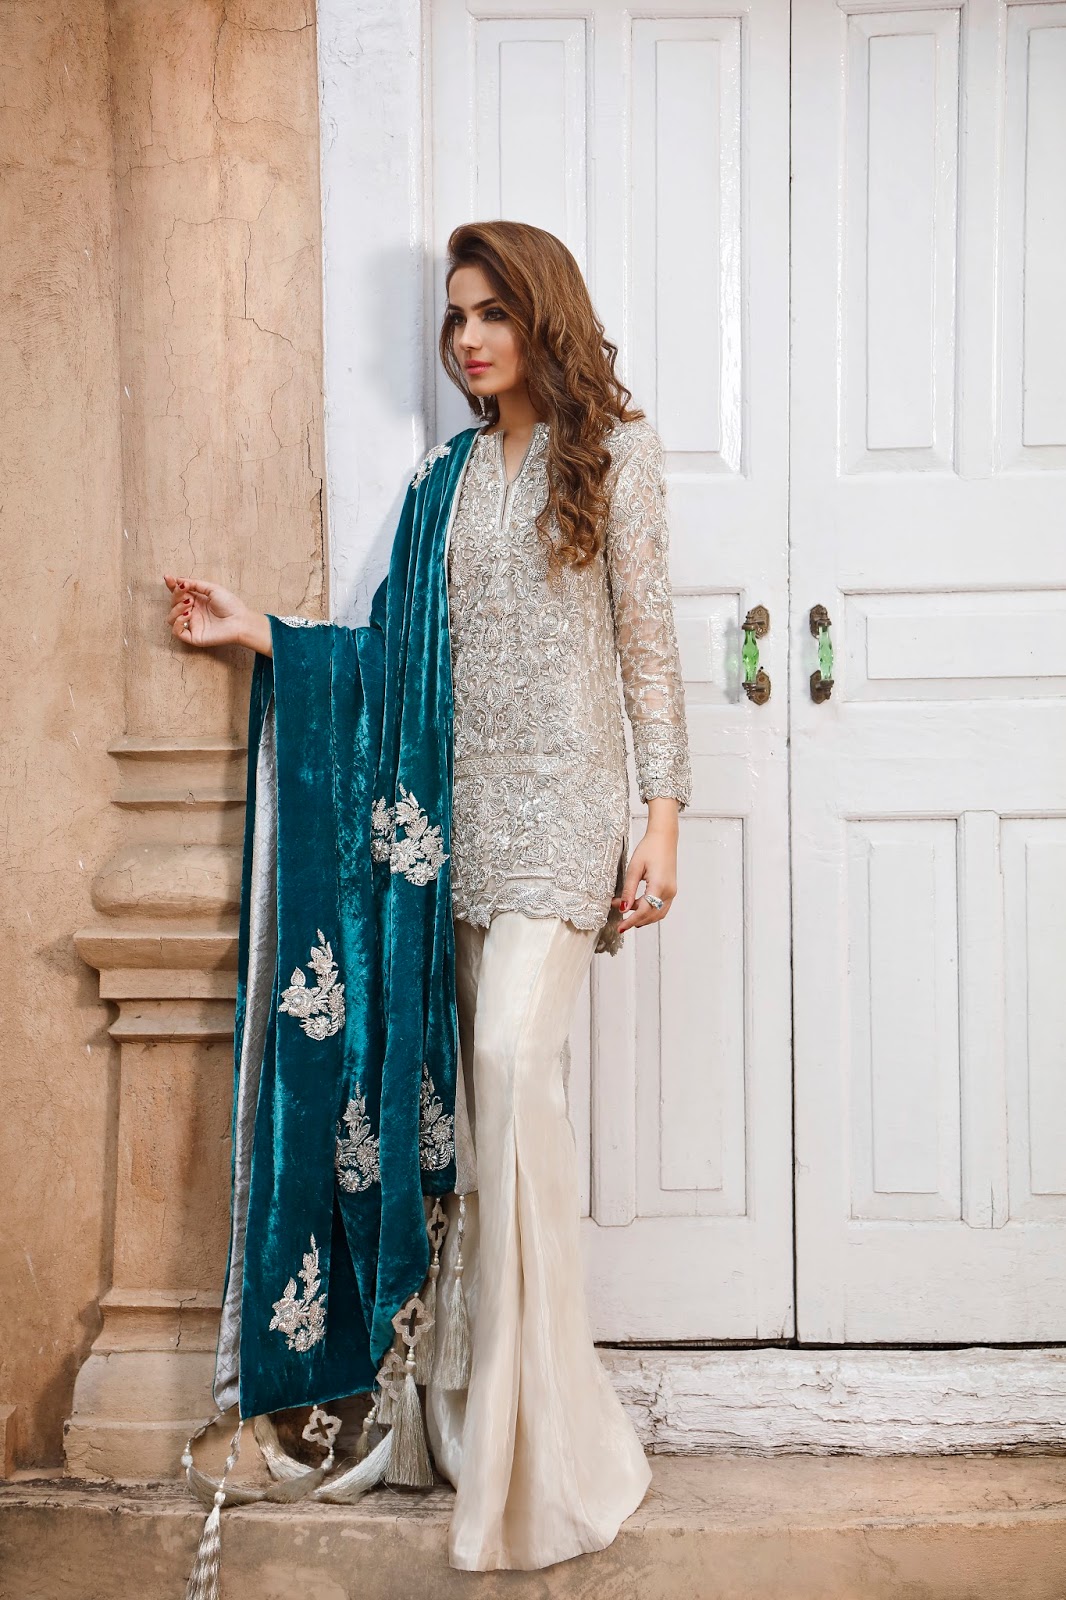 Pakistani Model Alyzeh Gabol Looks Gorgeous As She Displays Latest Formals and Bridals Collection By Rema & Shehrbano